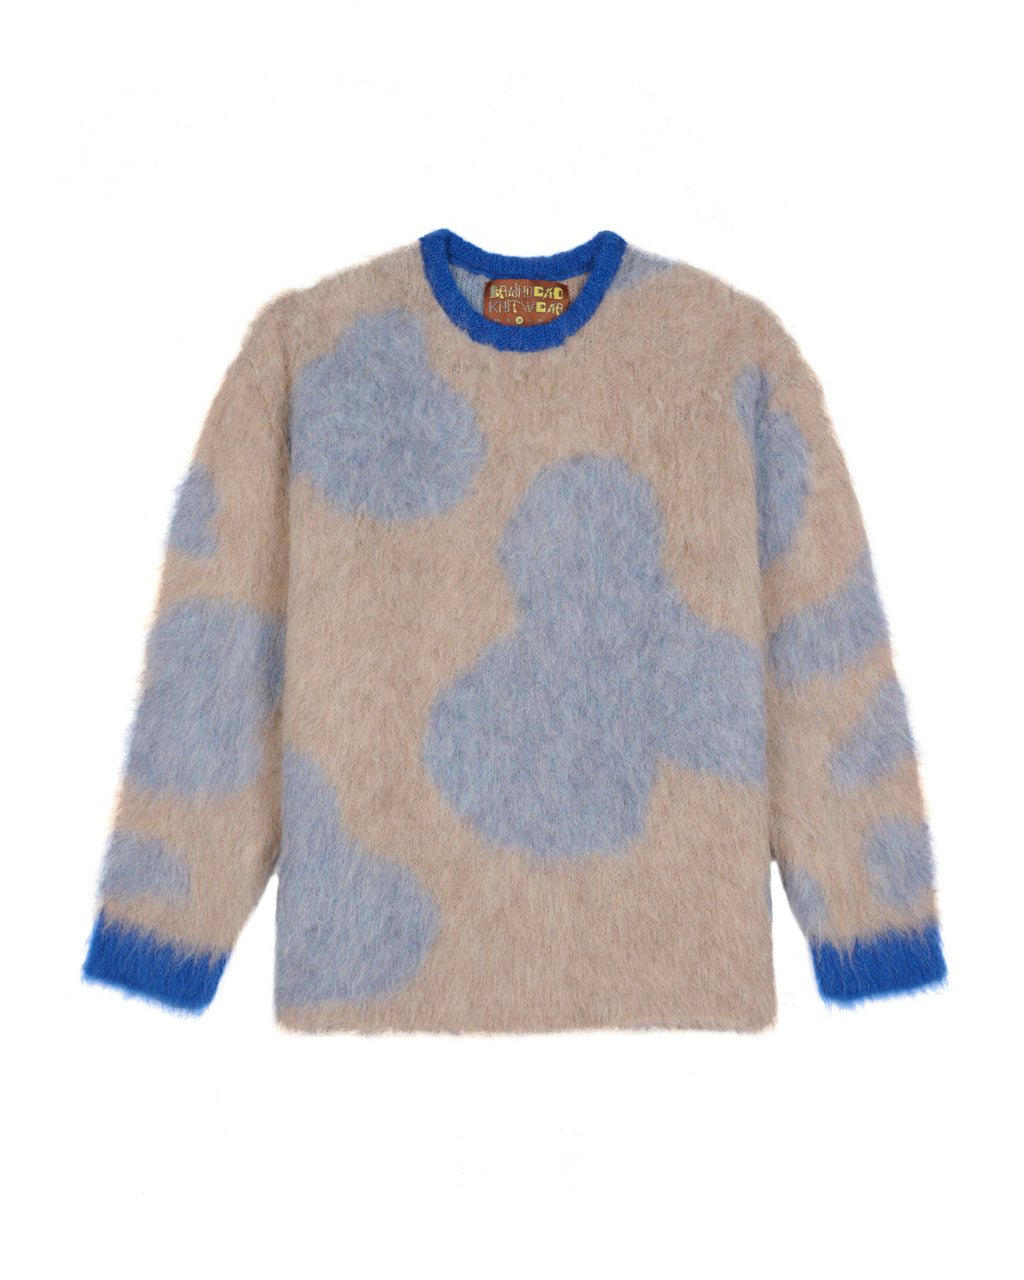 Boxy Knit Cow Print Sweater - Taupe 1